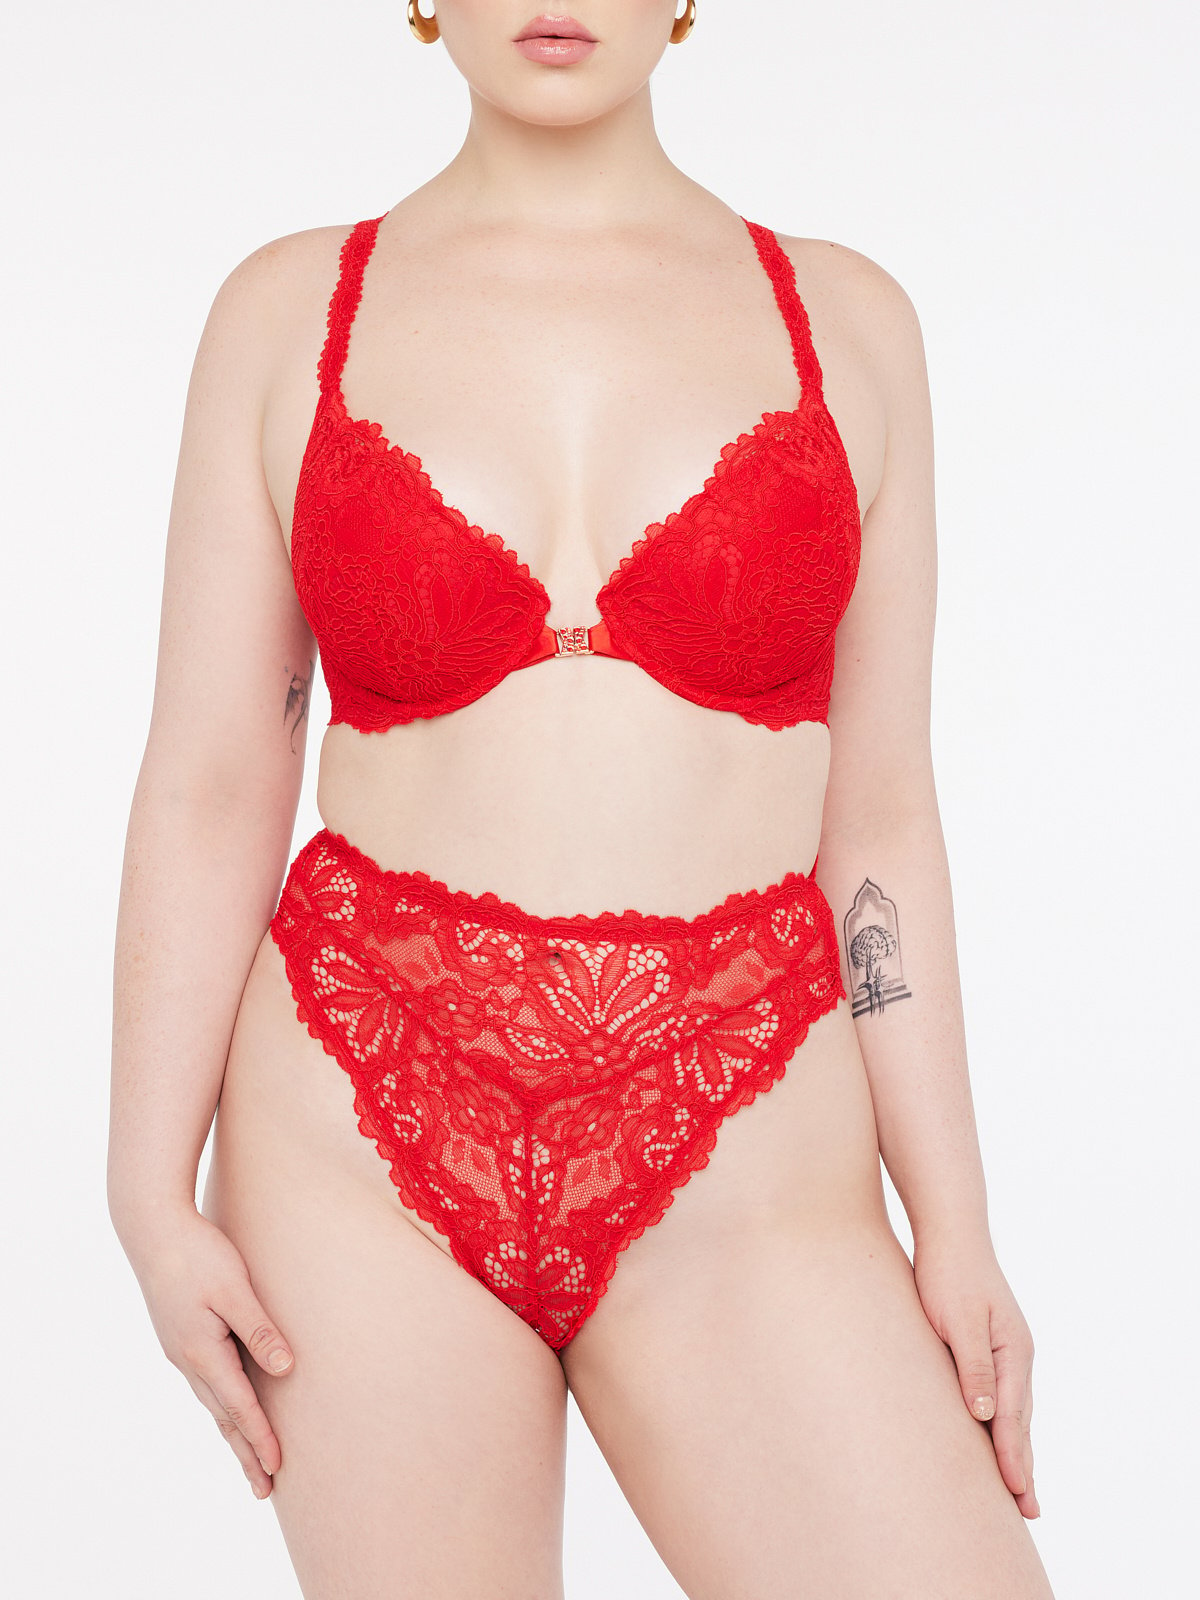 Romantic Corded Lace High-Waist Thong Knickers in Red